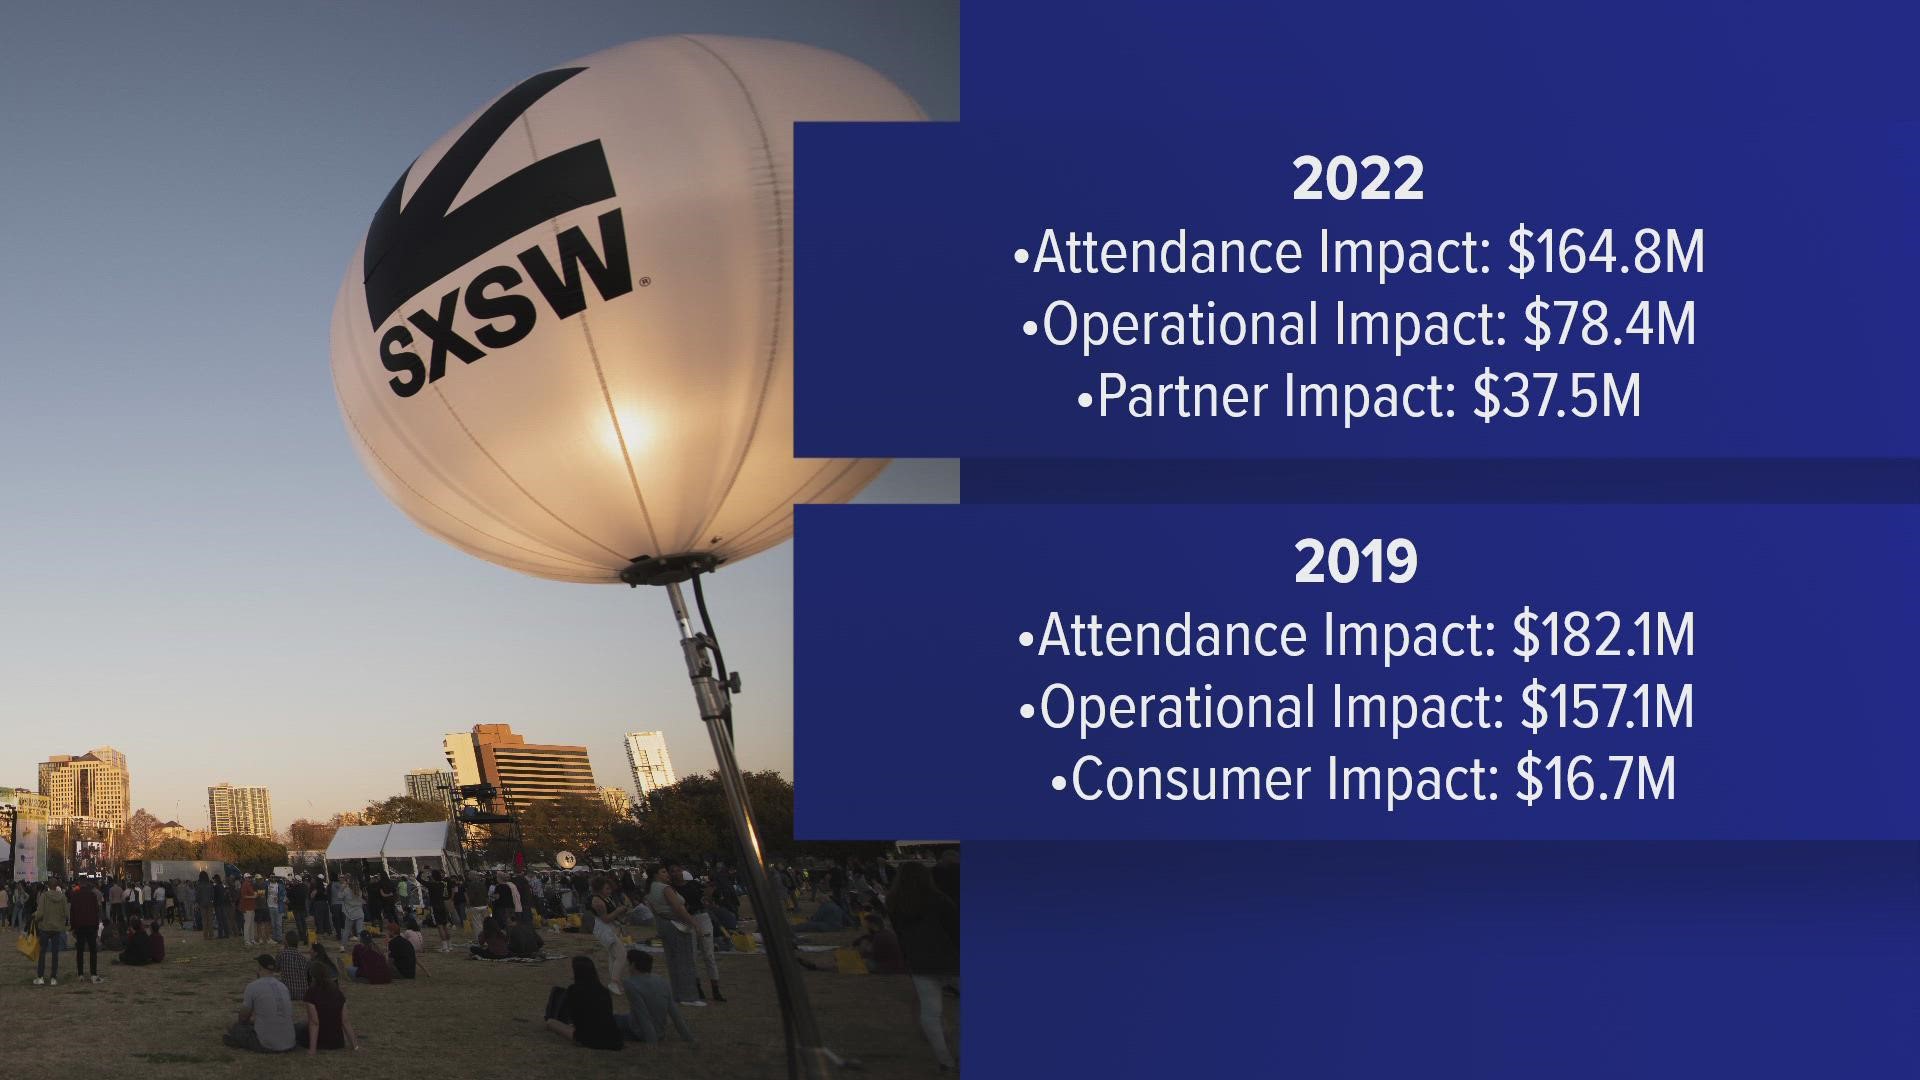 South by Southwest is known for being one of the Austin's most profitable events. But during the pandemic, it saw a huge dip in profit.